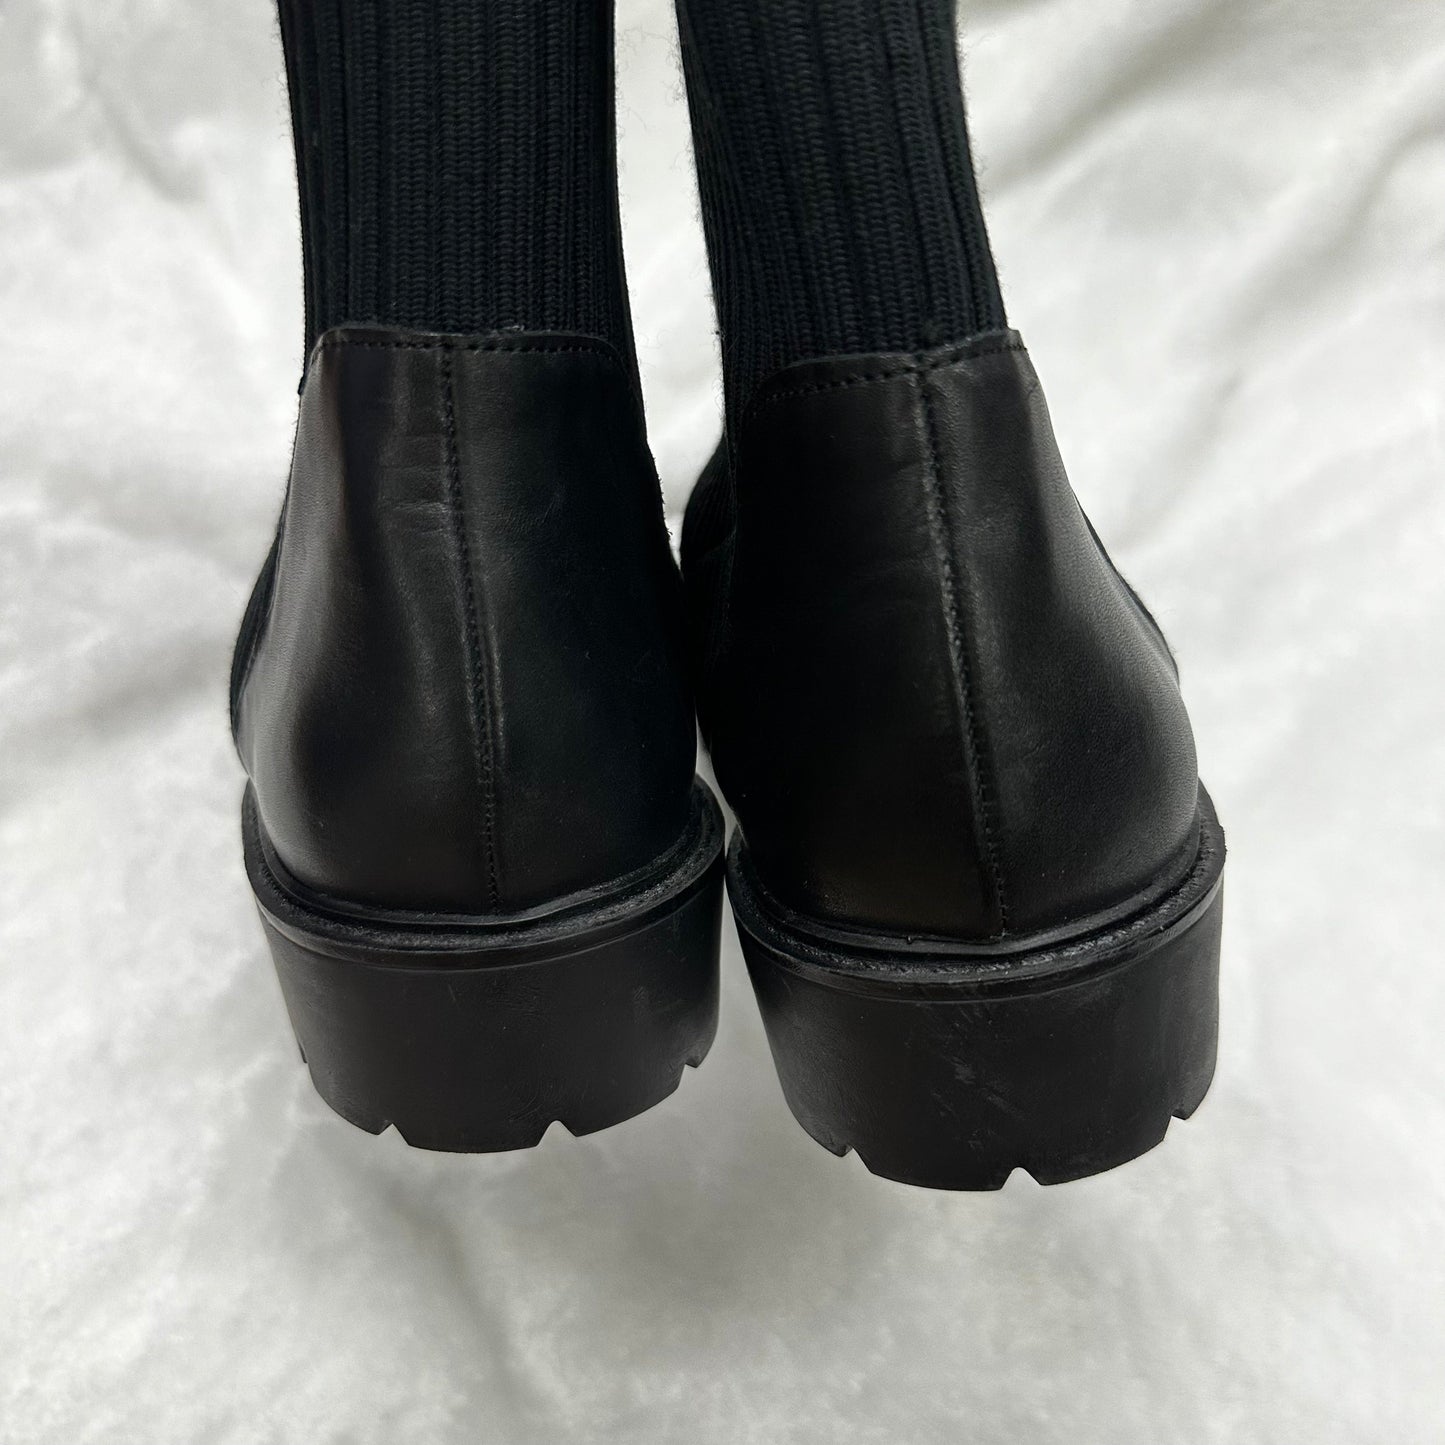 Black Boots Ankle Flats Charles By Charles David, Size 10